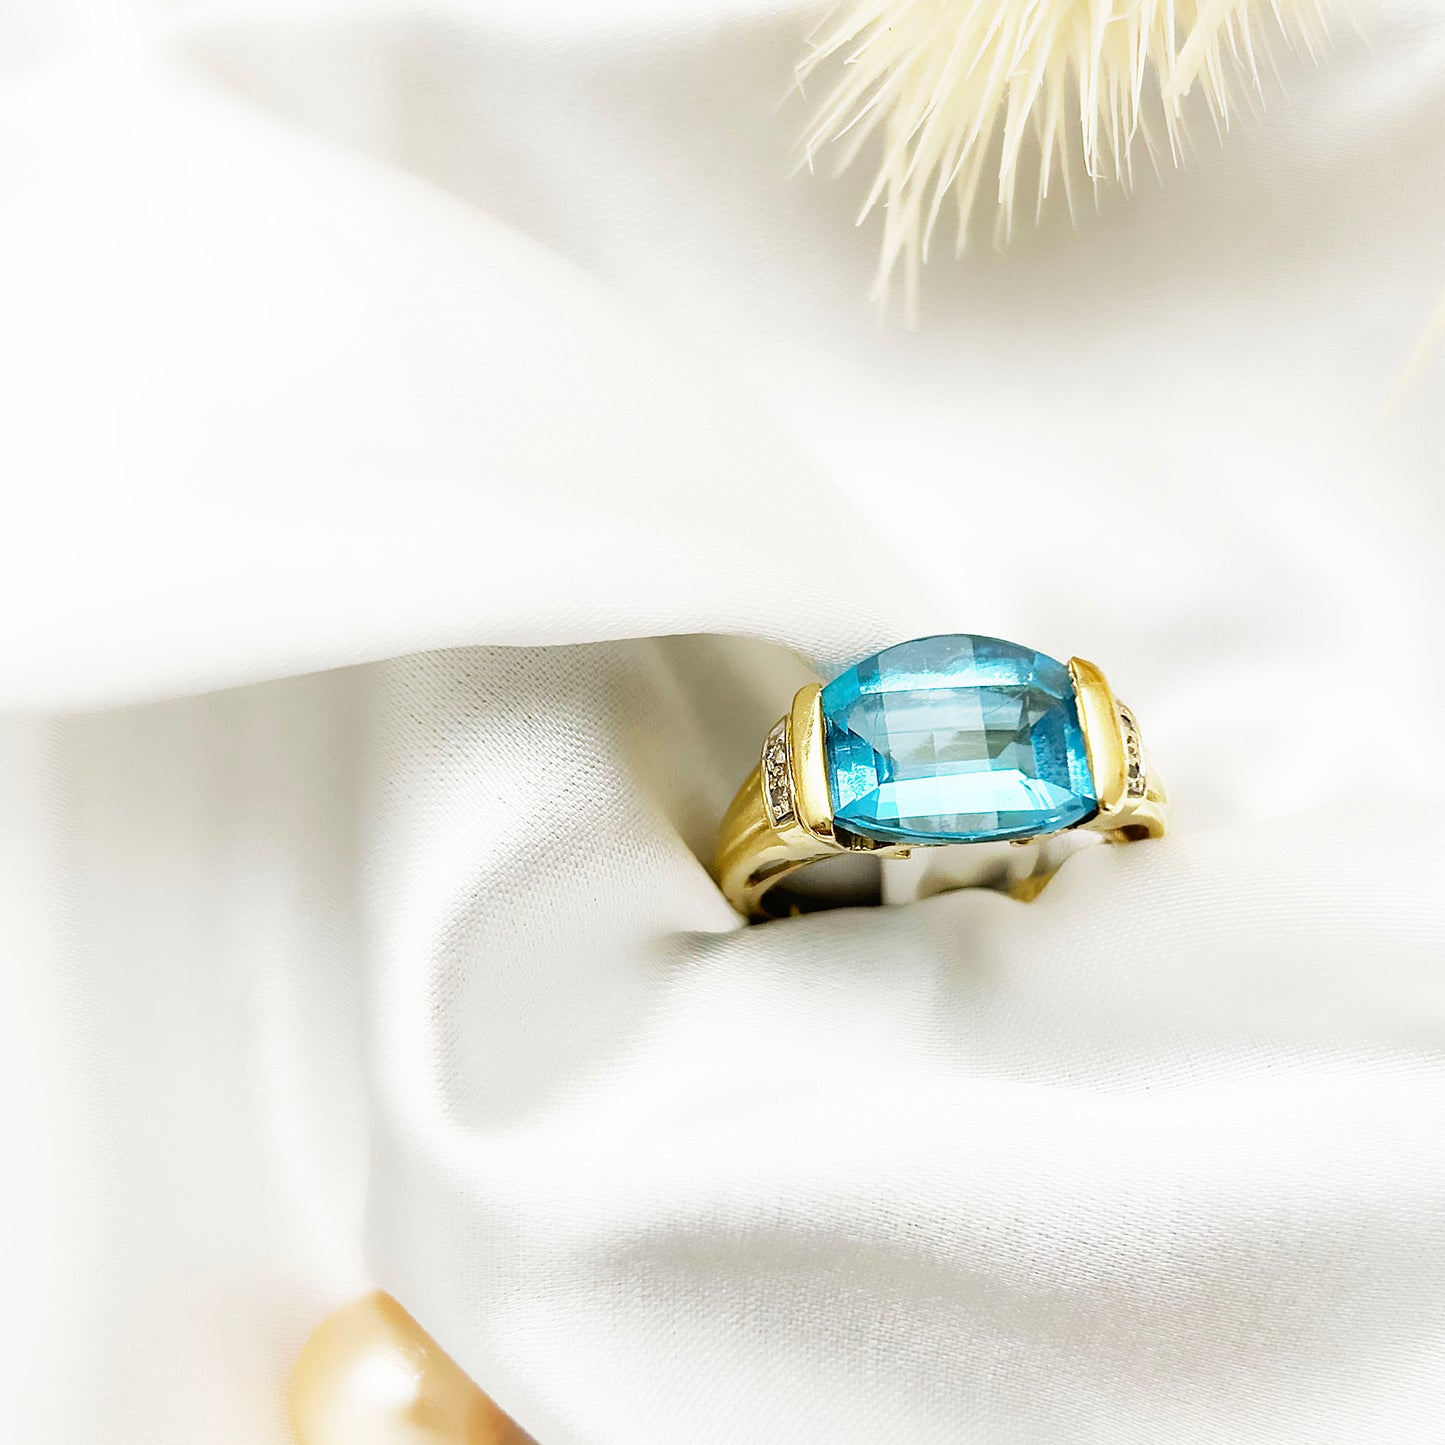 Vintage 14ct Gold Ring with Topaz & Diamonds